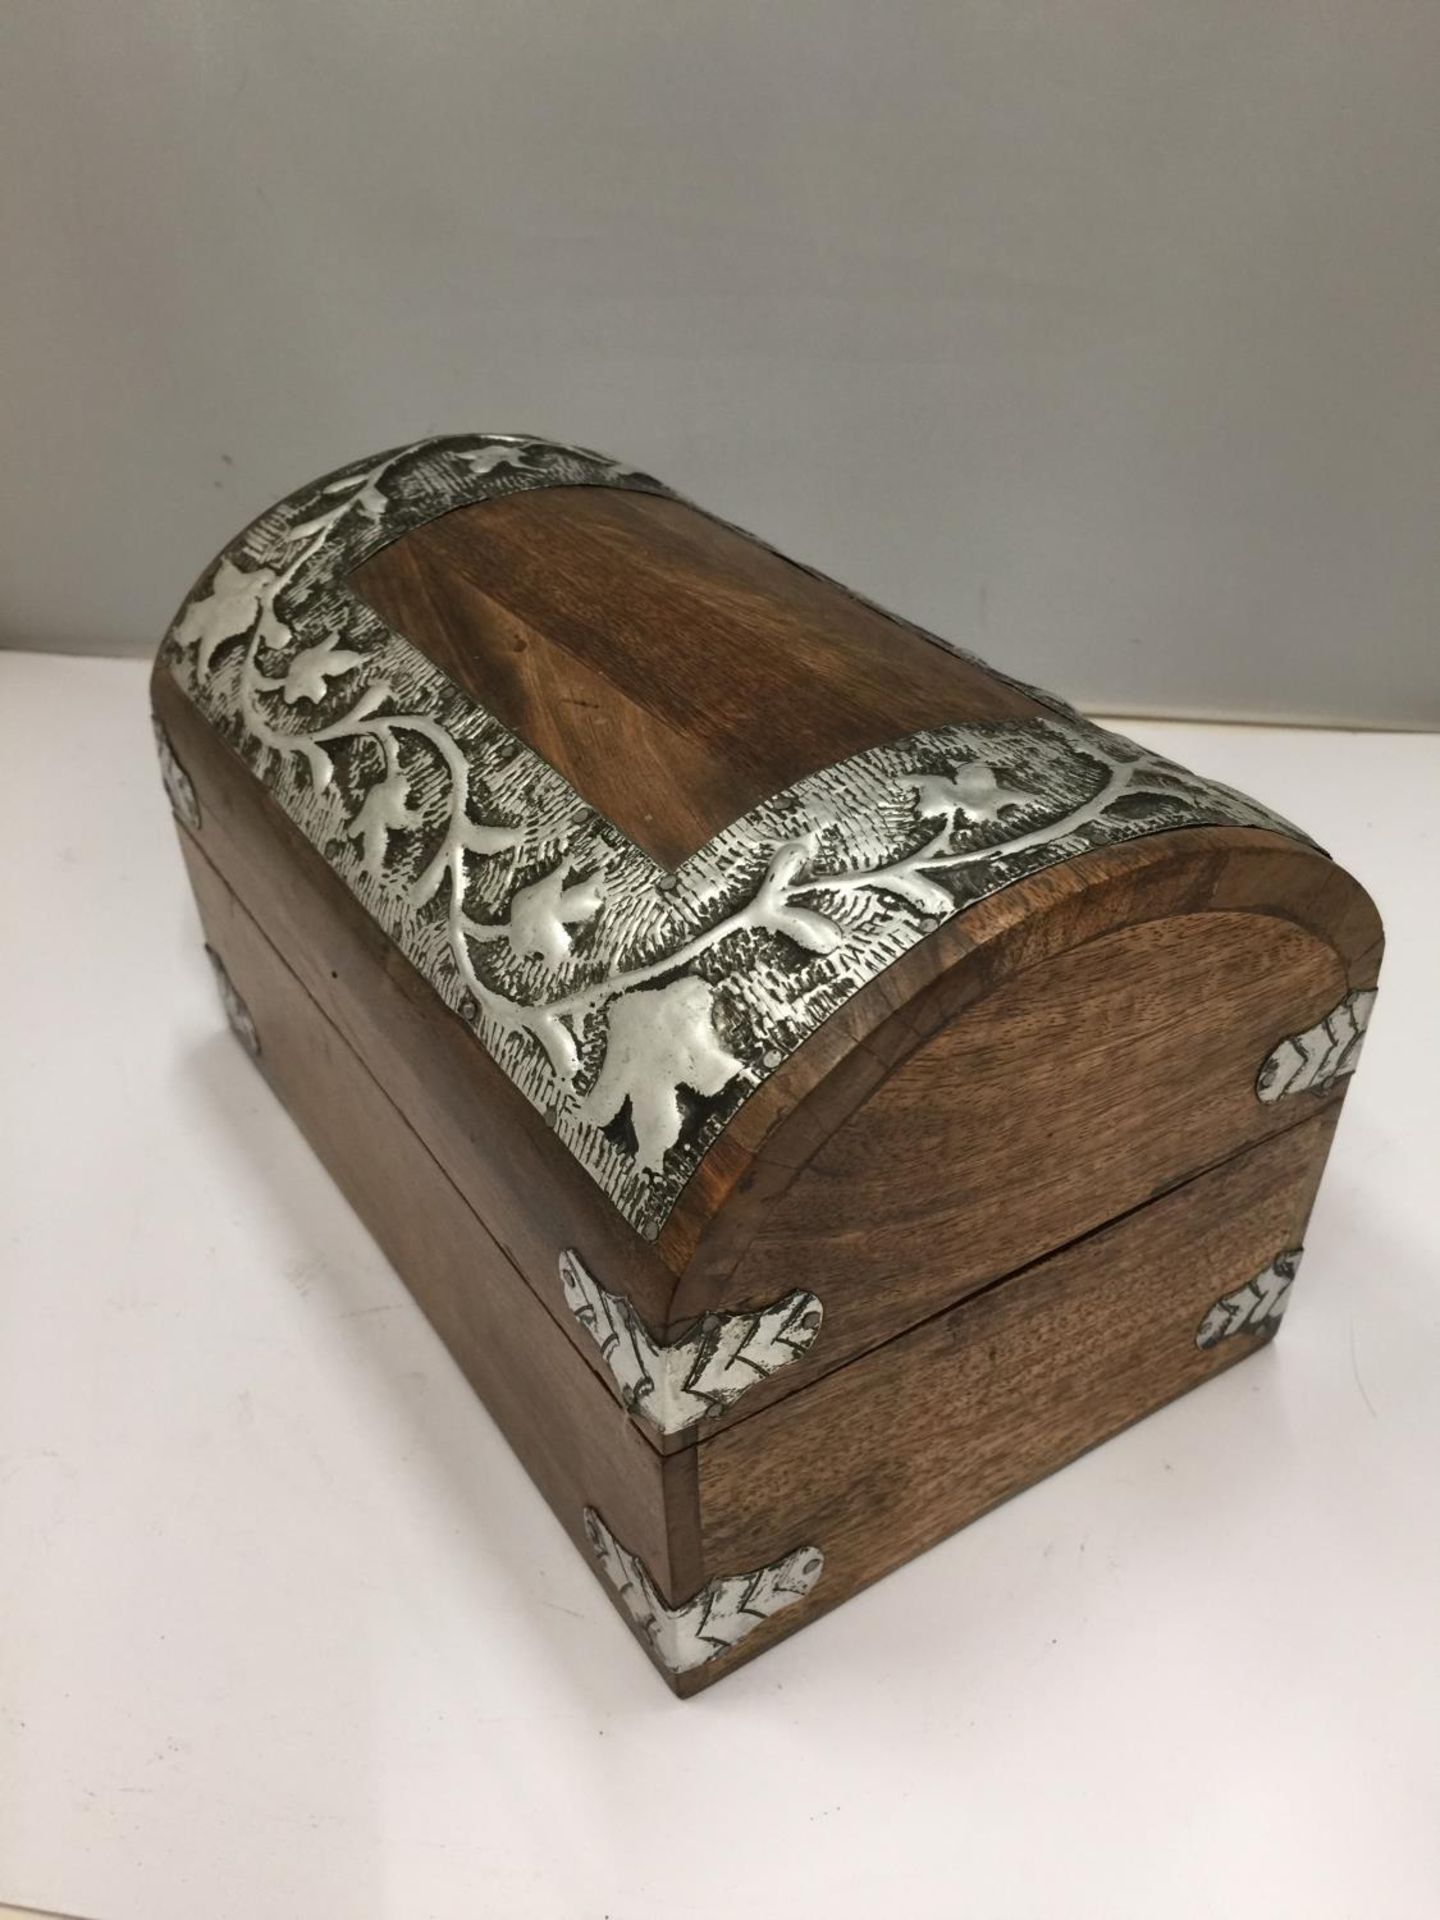 AN OAK DOMED TOP CHEST WITH WHITE METAL DECORATION 24CM X 16CM X 16CM - Image 2 of 3